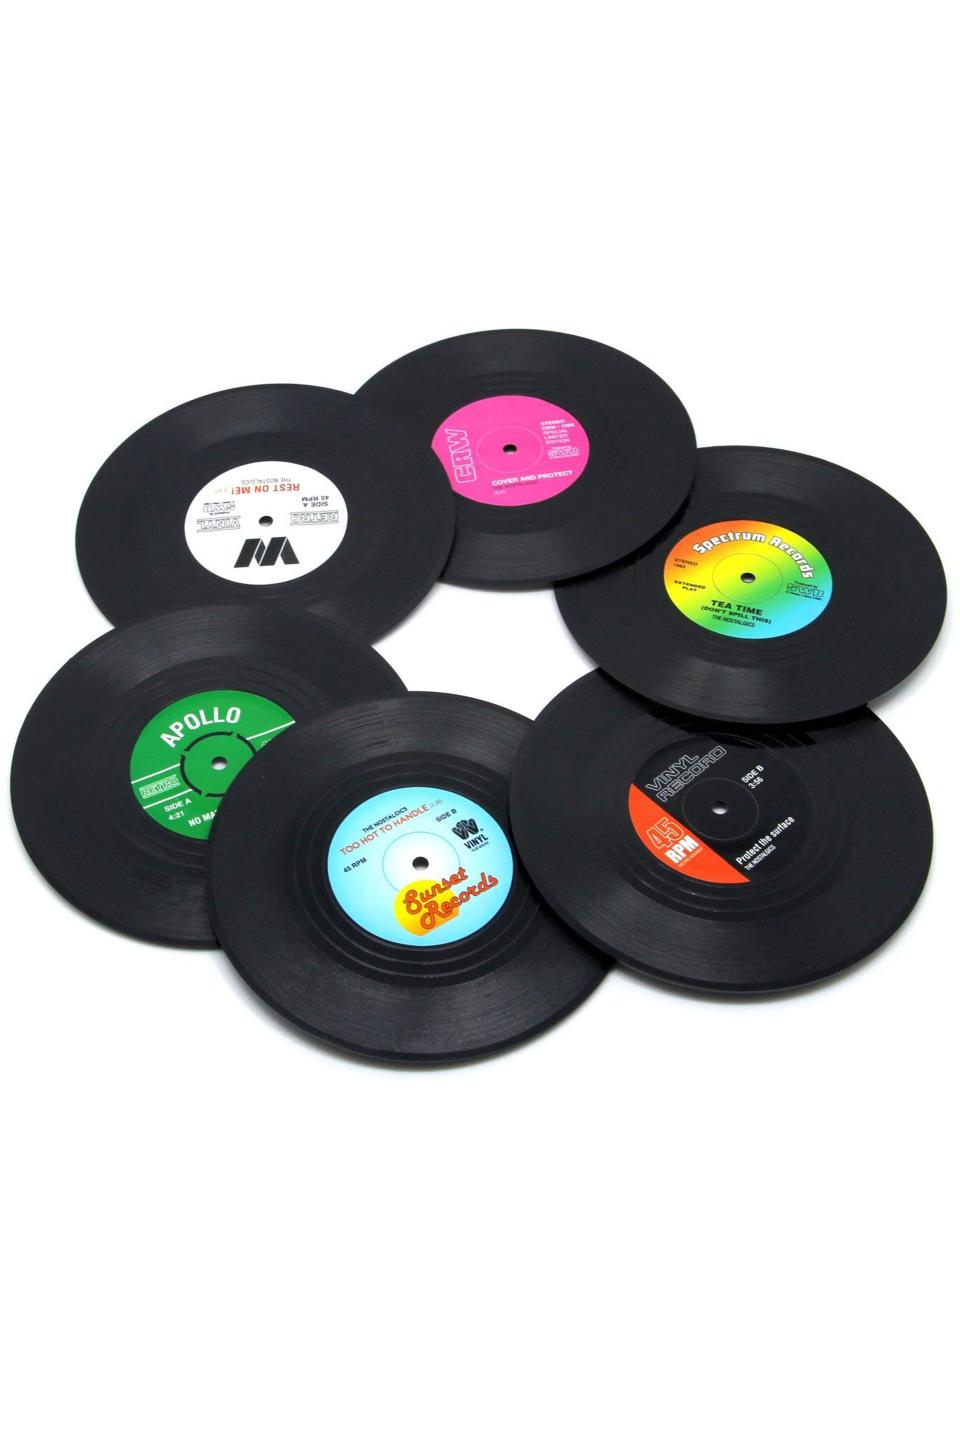 3) BEST GRAPHIC: Vinyl Record Disk Coasters